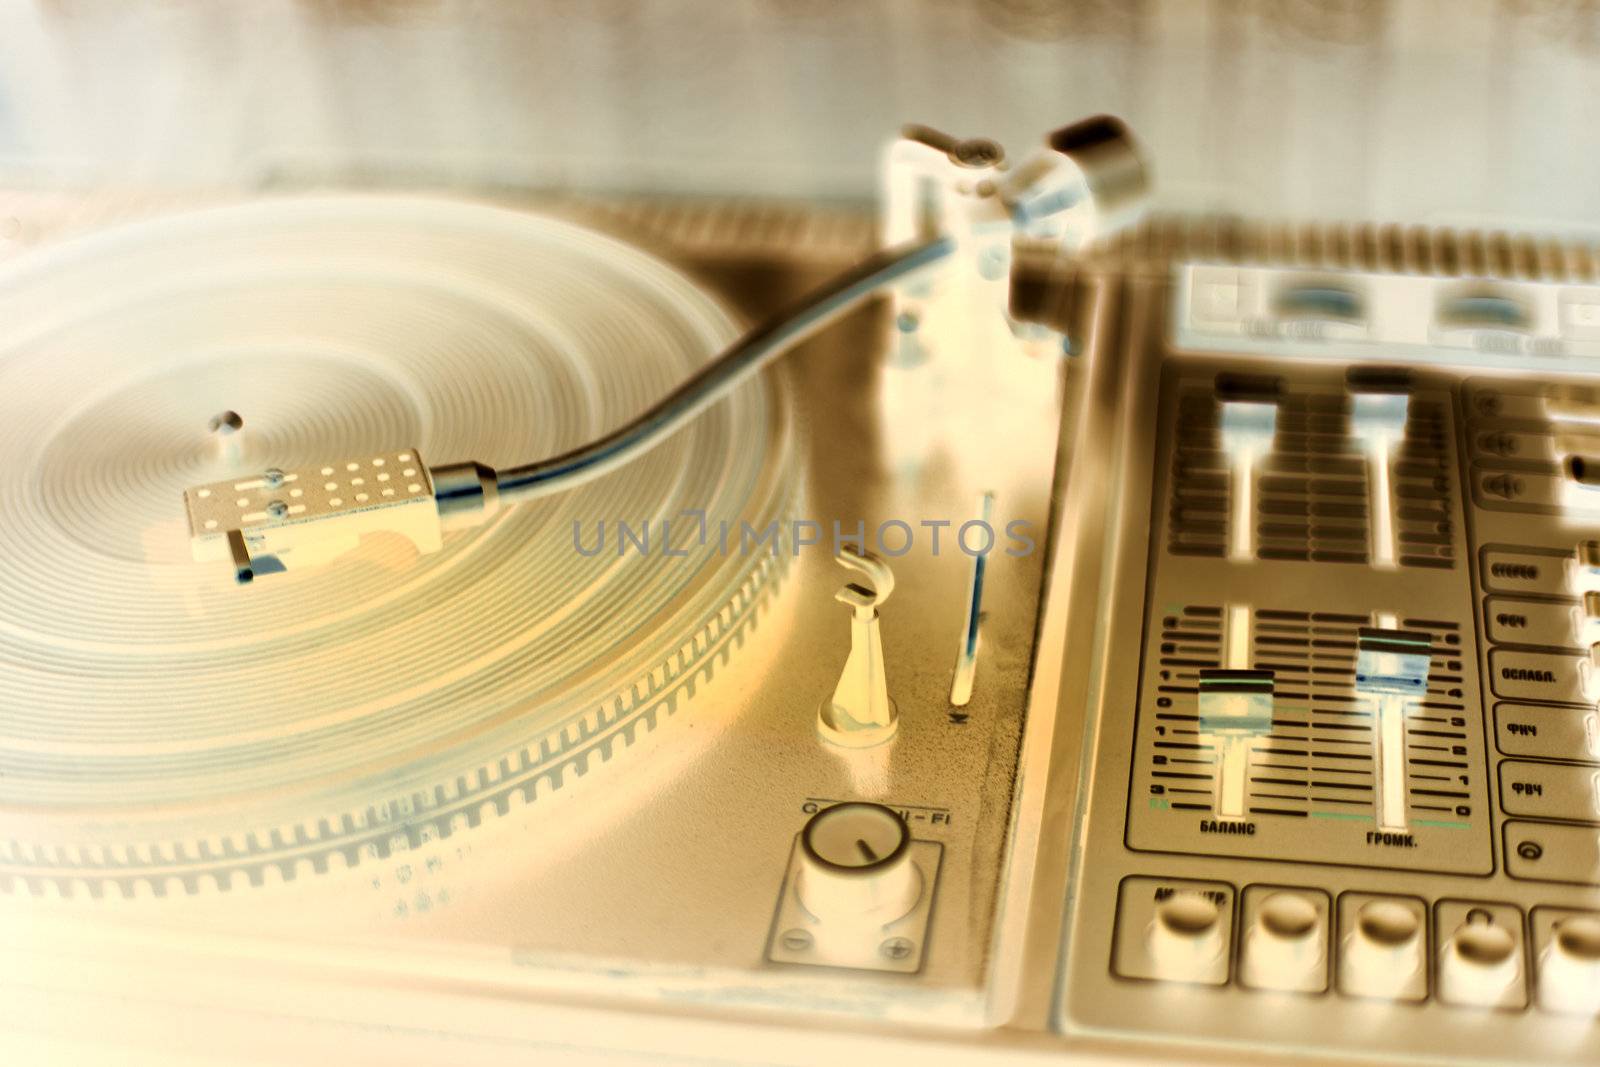 Vinyl player is waiting its wise user by vetdoctor